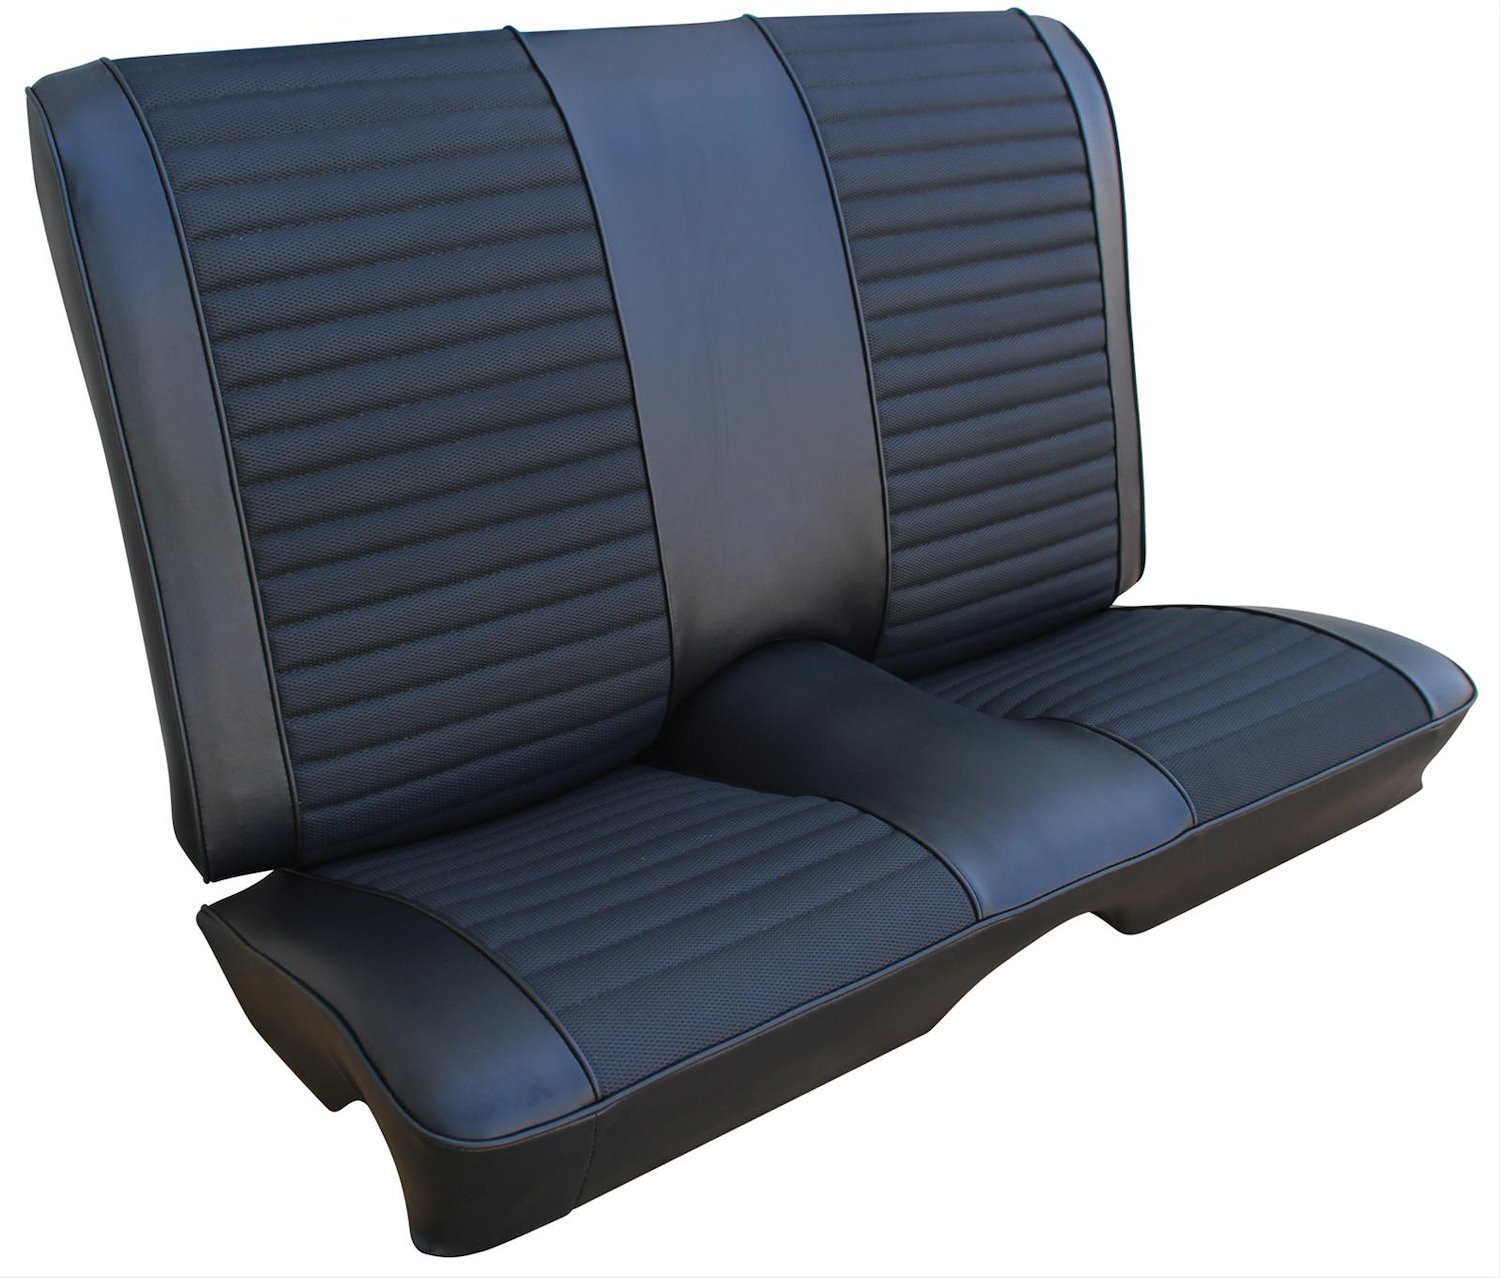 1969 Ford Mustang Mach-1 Sports Roof Sports-Roof Interior Rear Bench Seat Upholstery Set